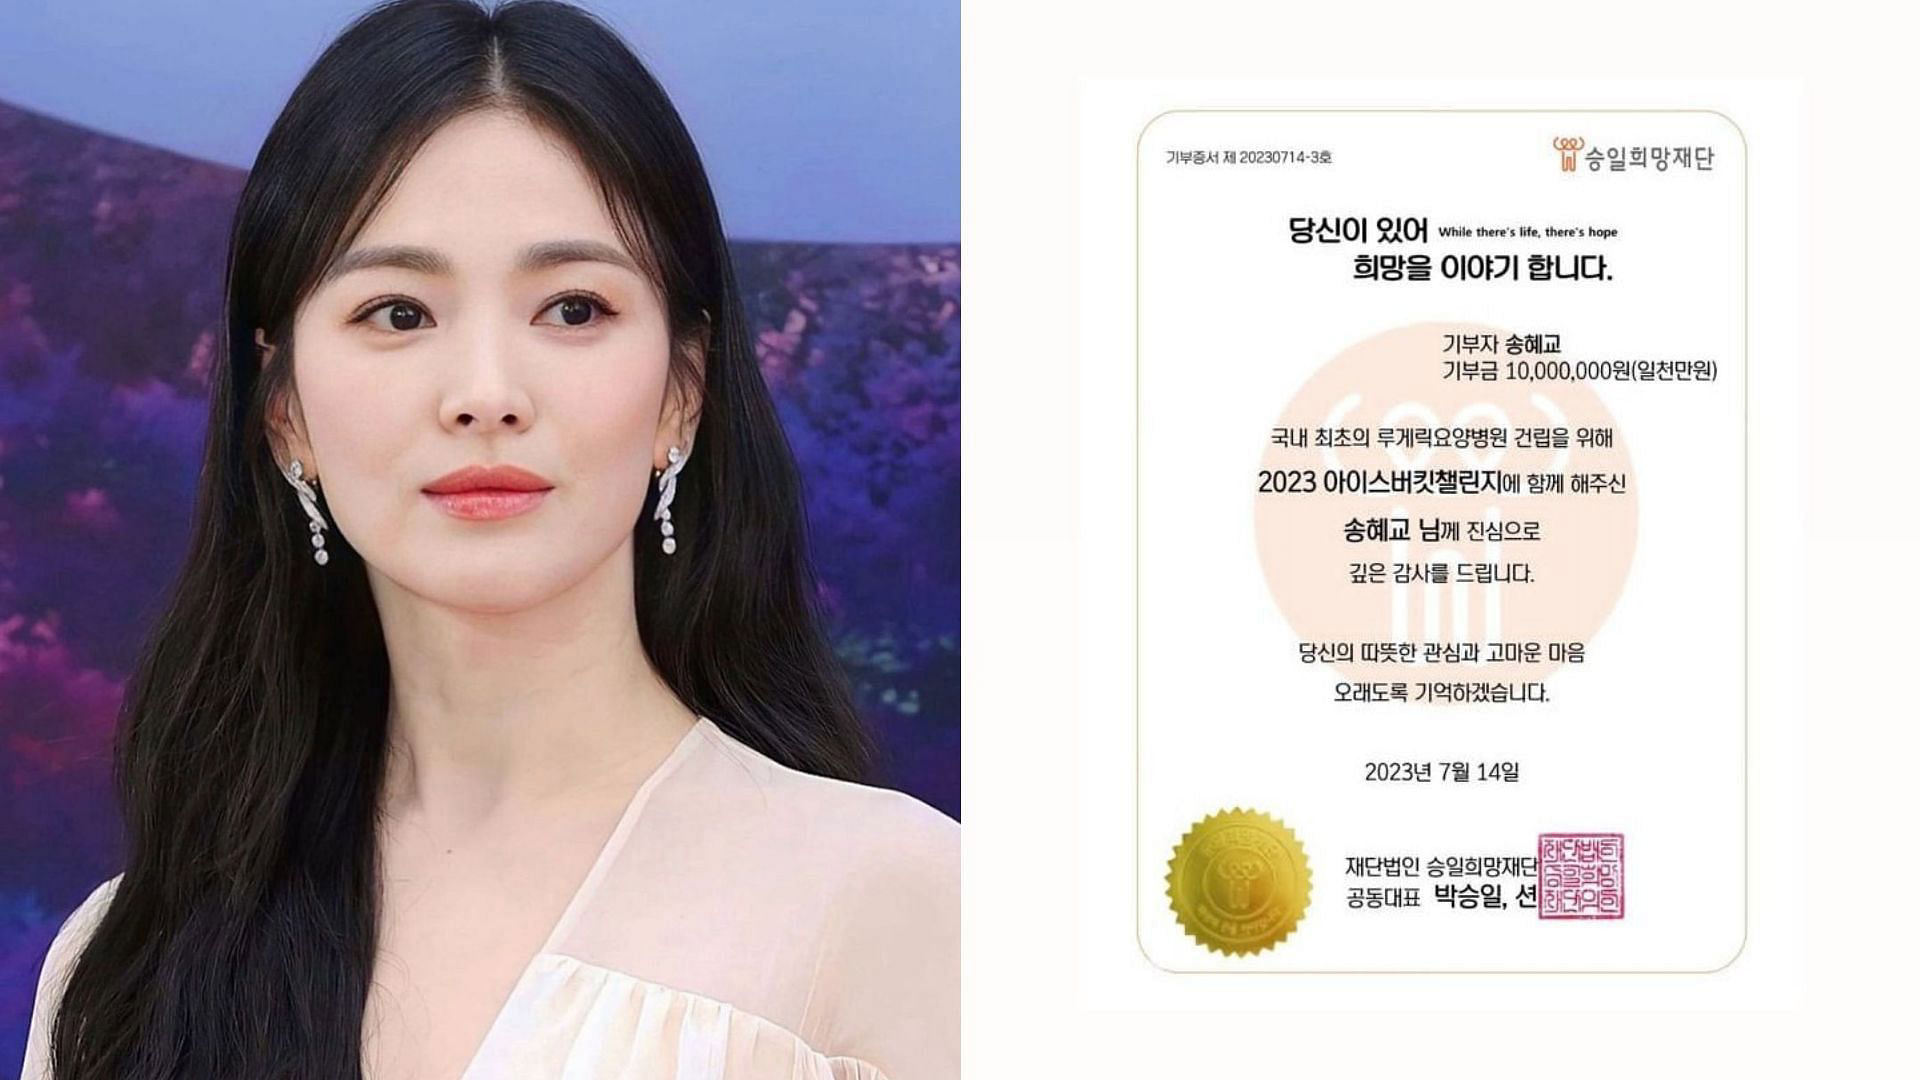 Song Hye Kyo Participates In The 2023 Ice Bucket Challenge Donates 10 Million Krw To Korea S